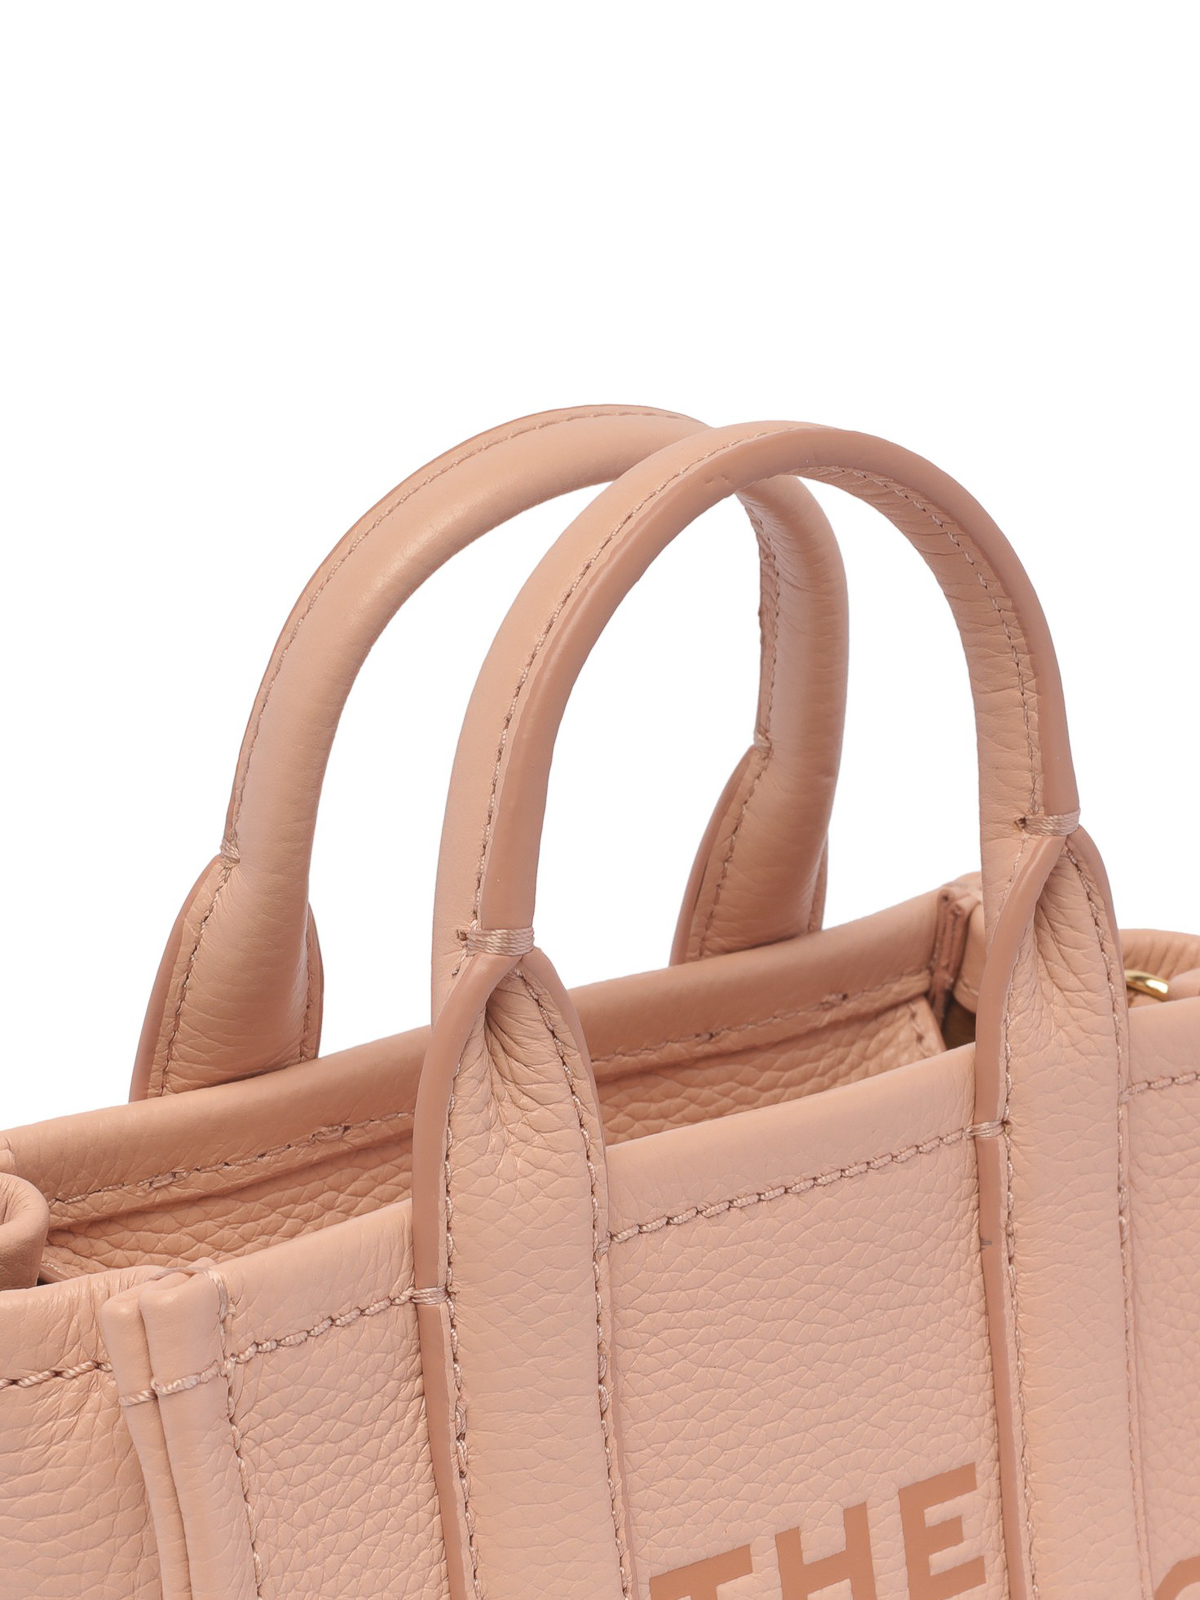 Shop Marc Jacobs The Micro Tote Bag In Pink